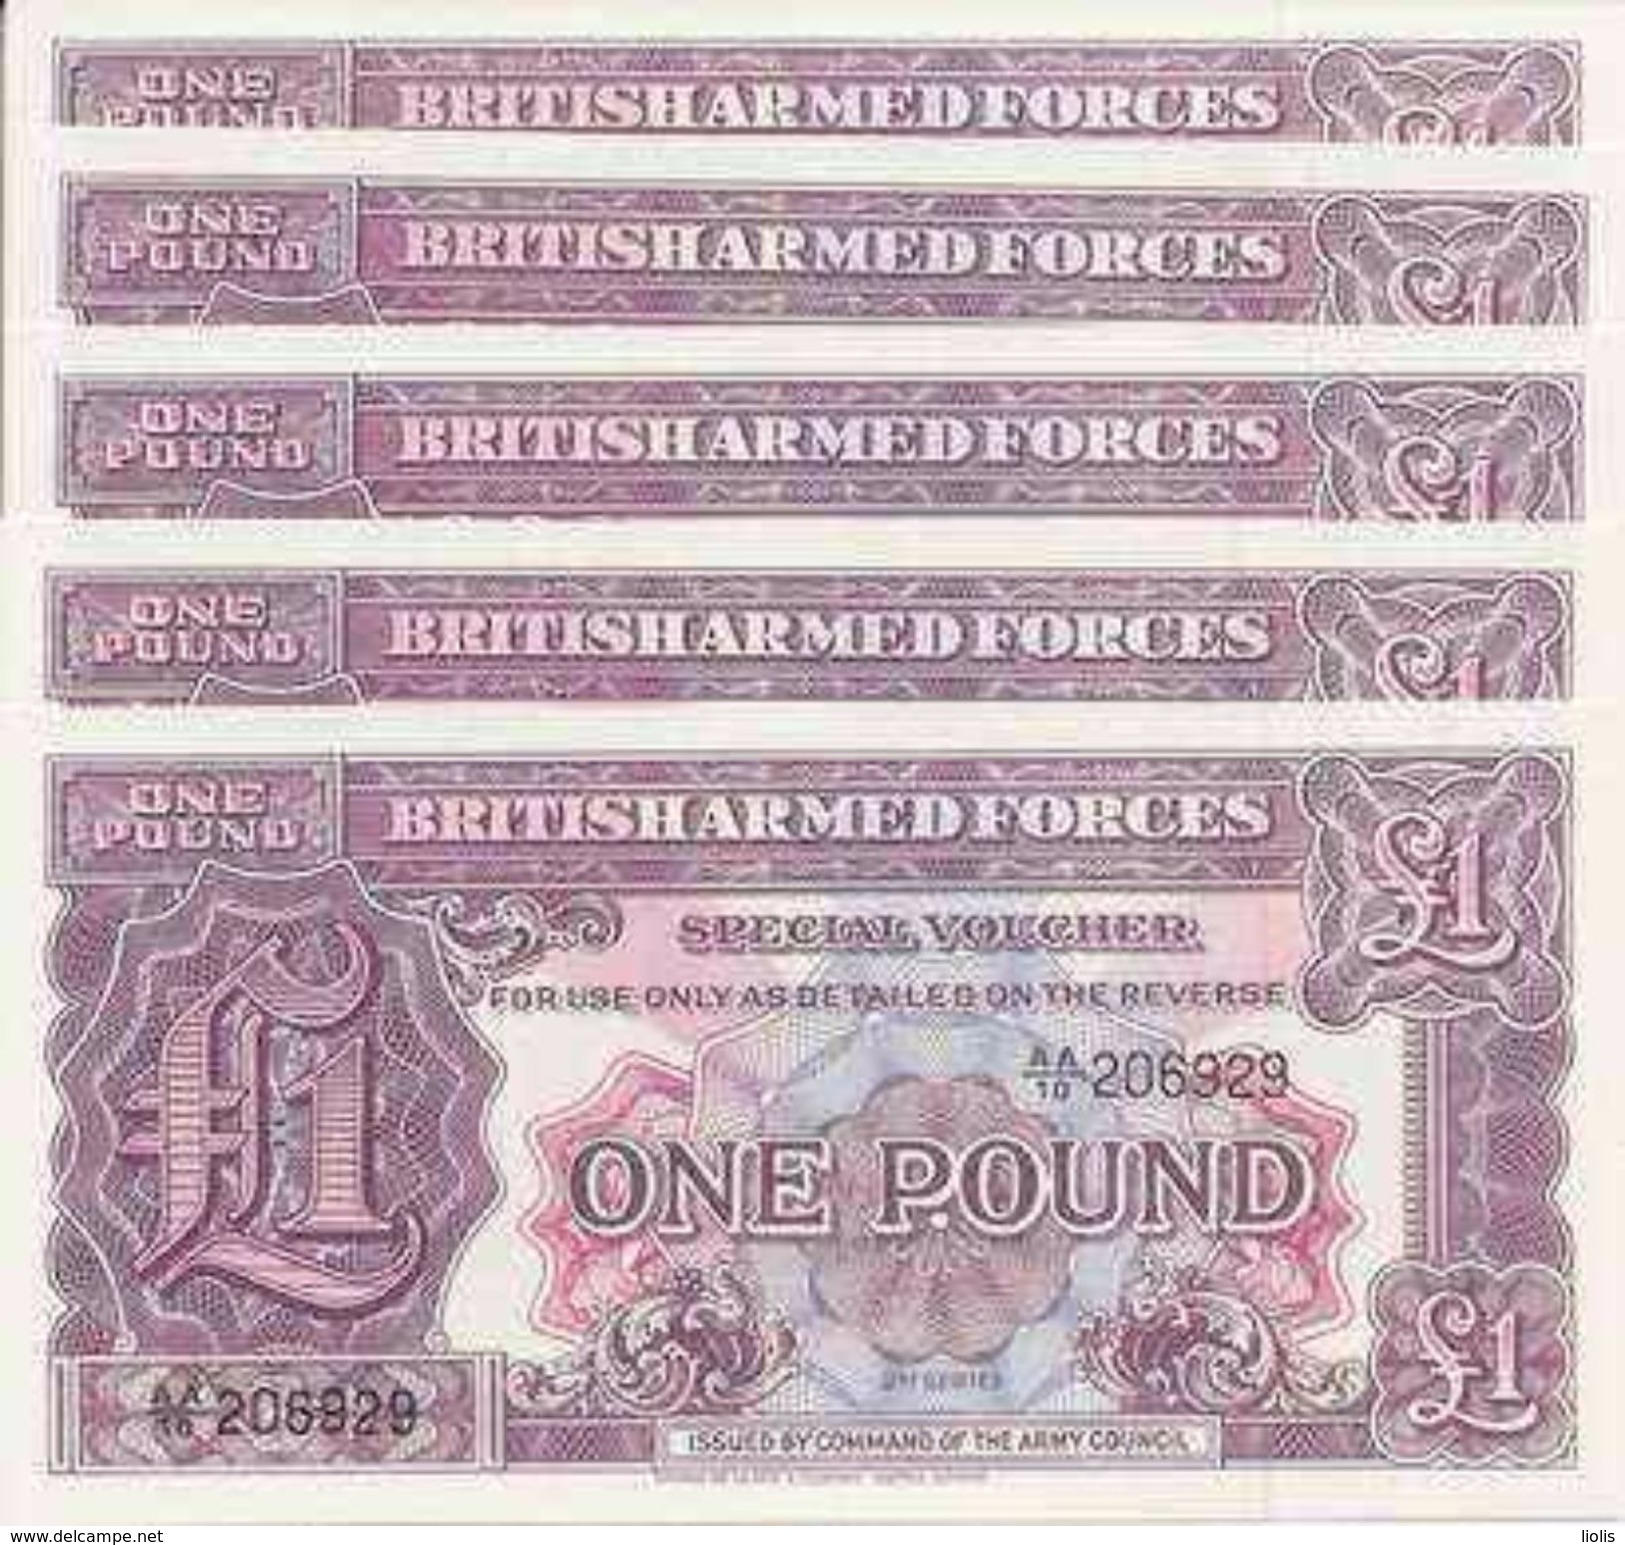 Great Britain 1 Pound  (2th Series) UNC (Lot) - British Armed Forces & Special Vouchers